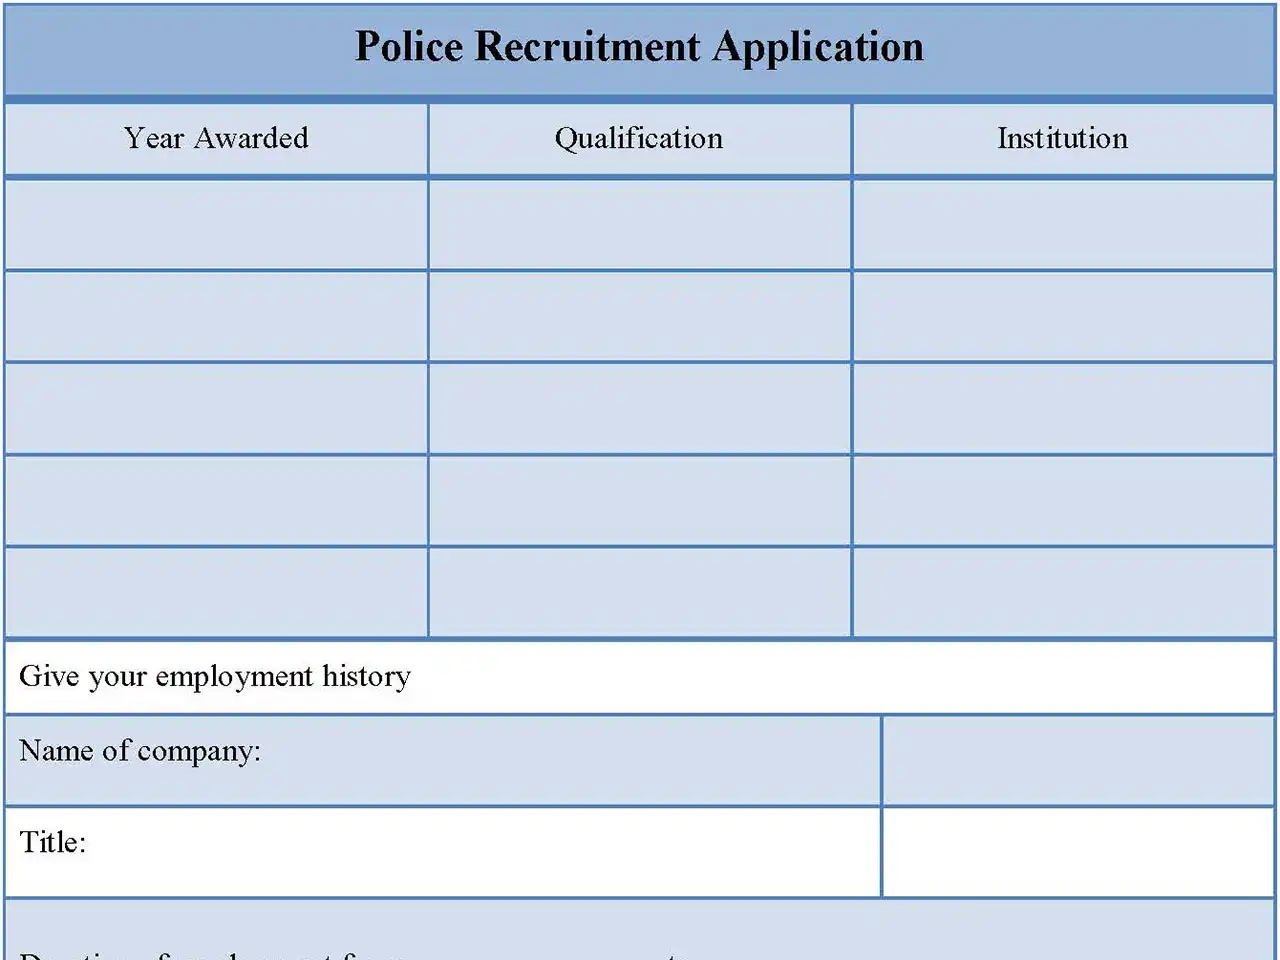 Police Recruitment Application Form